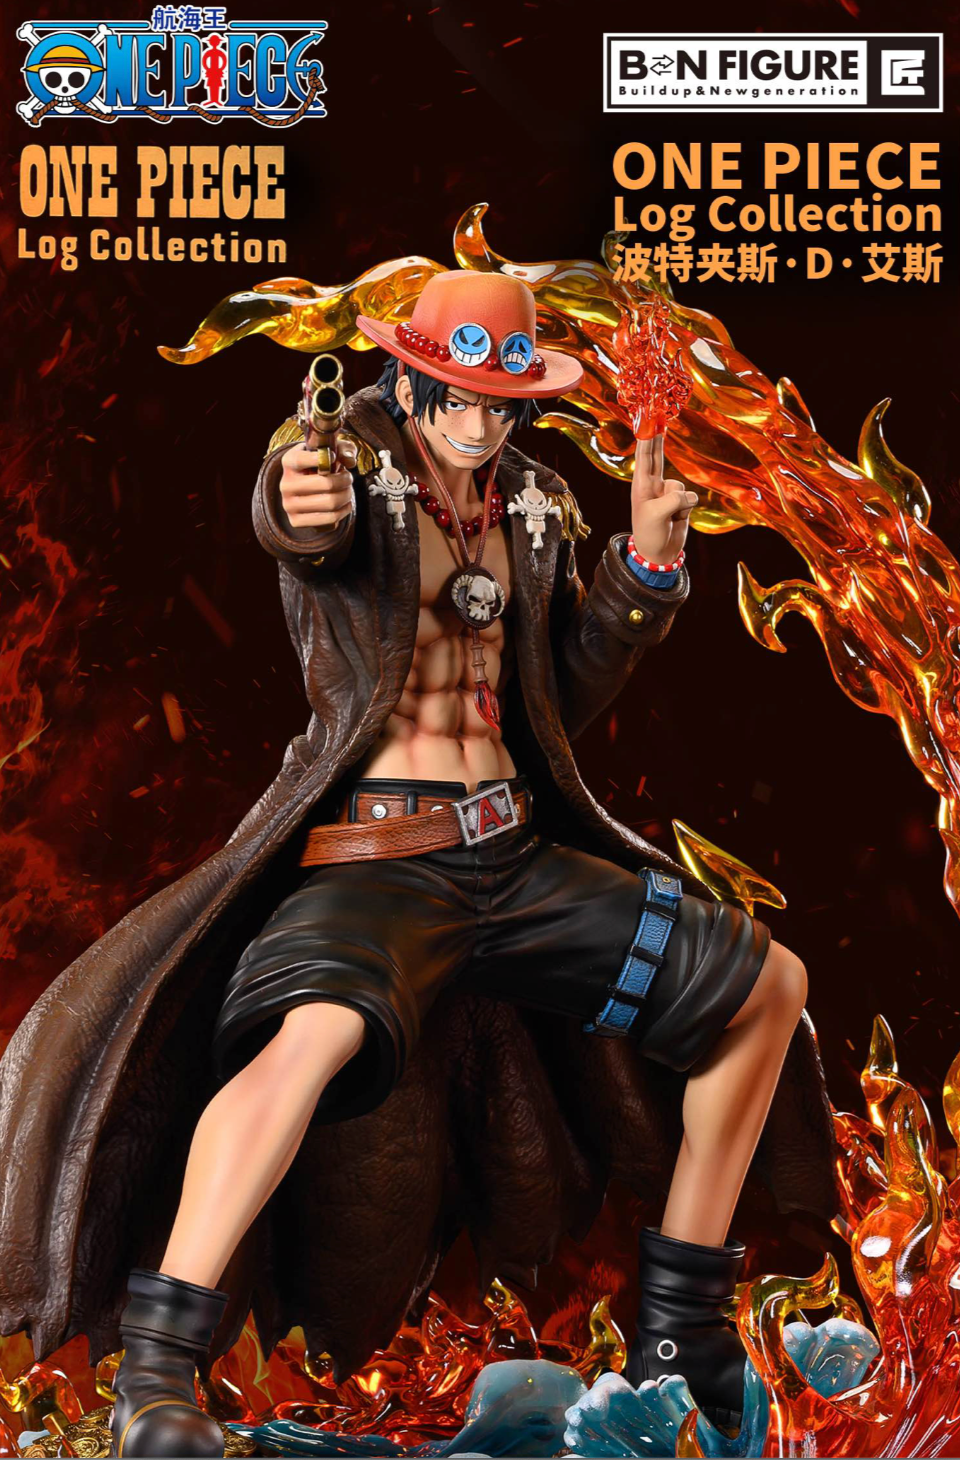 ONE PIECE Log Collection - One Piece Portgas D Ace (Licensed) [PRE-ORD